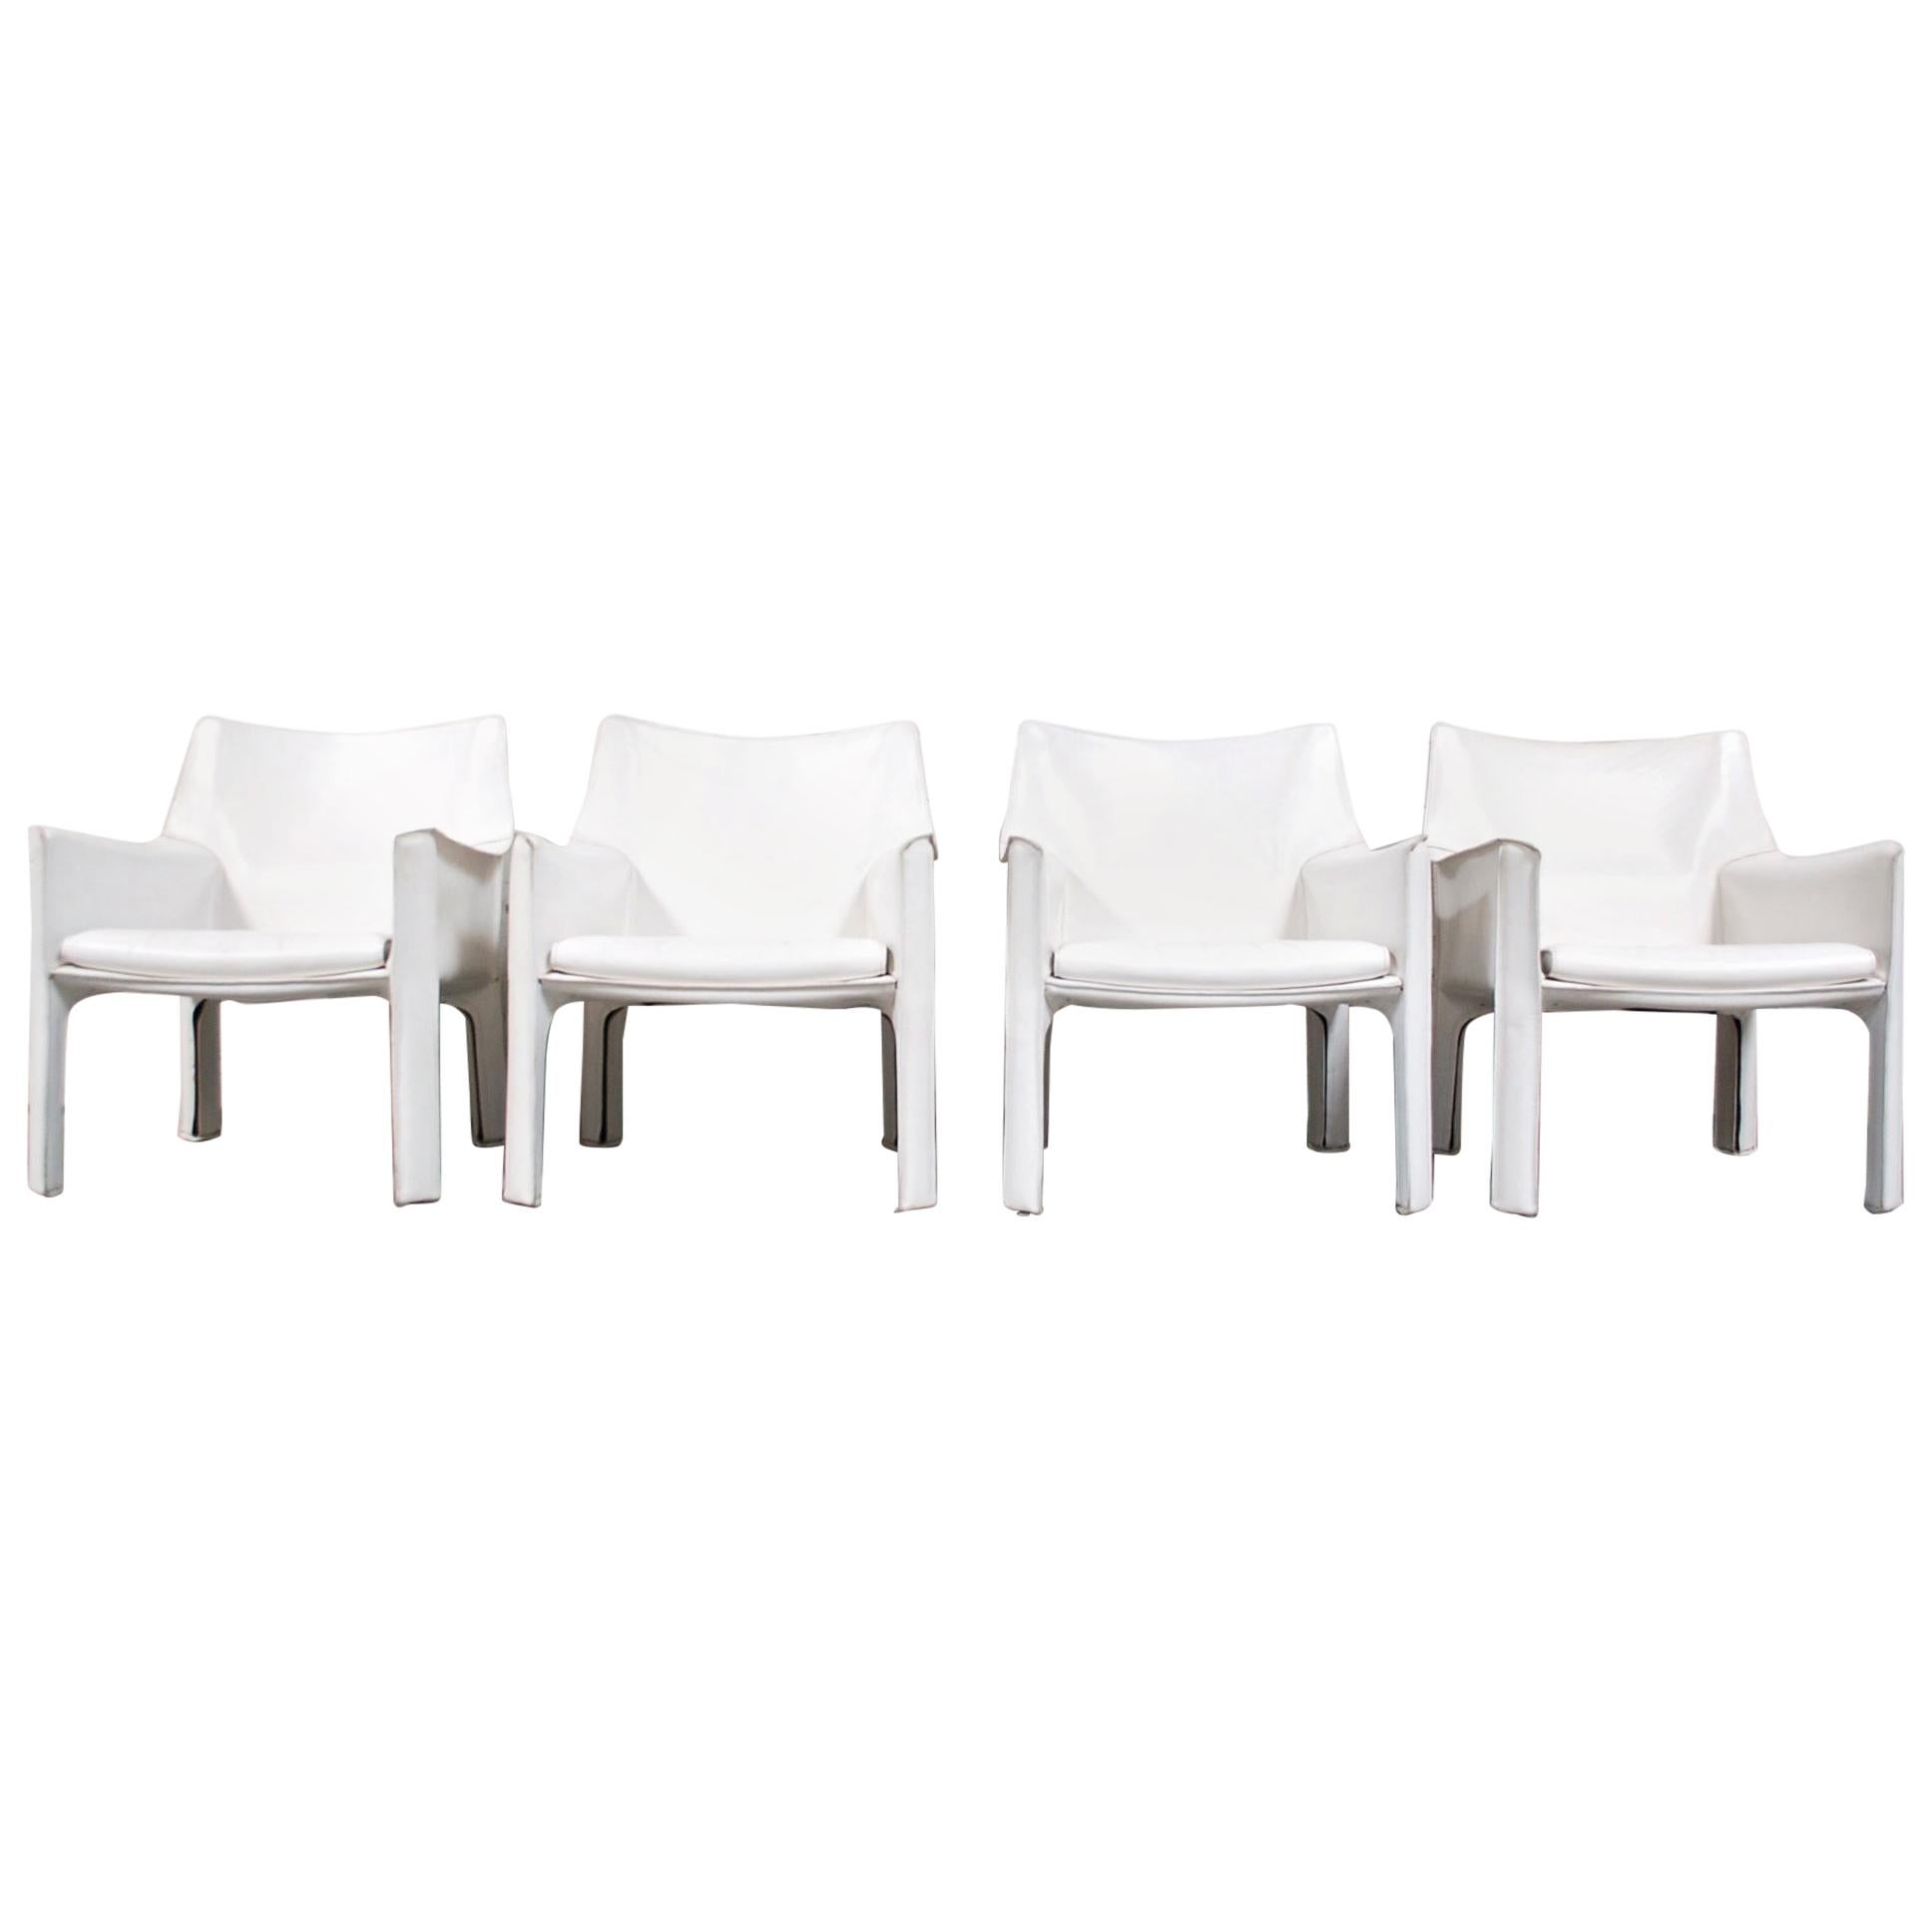 Cassina Cab 414 Leather 4x Lounge Chair Armchair White Set of 4